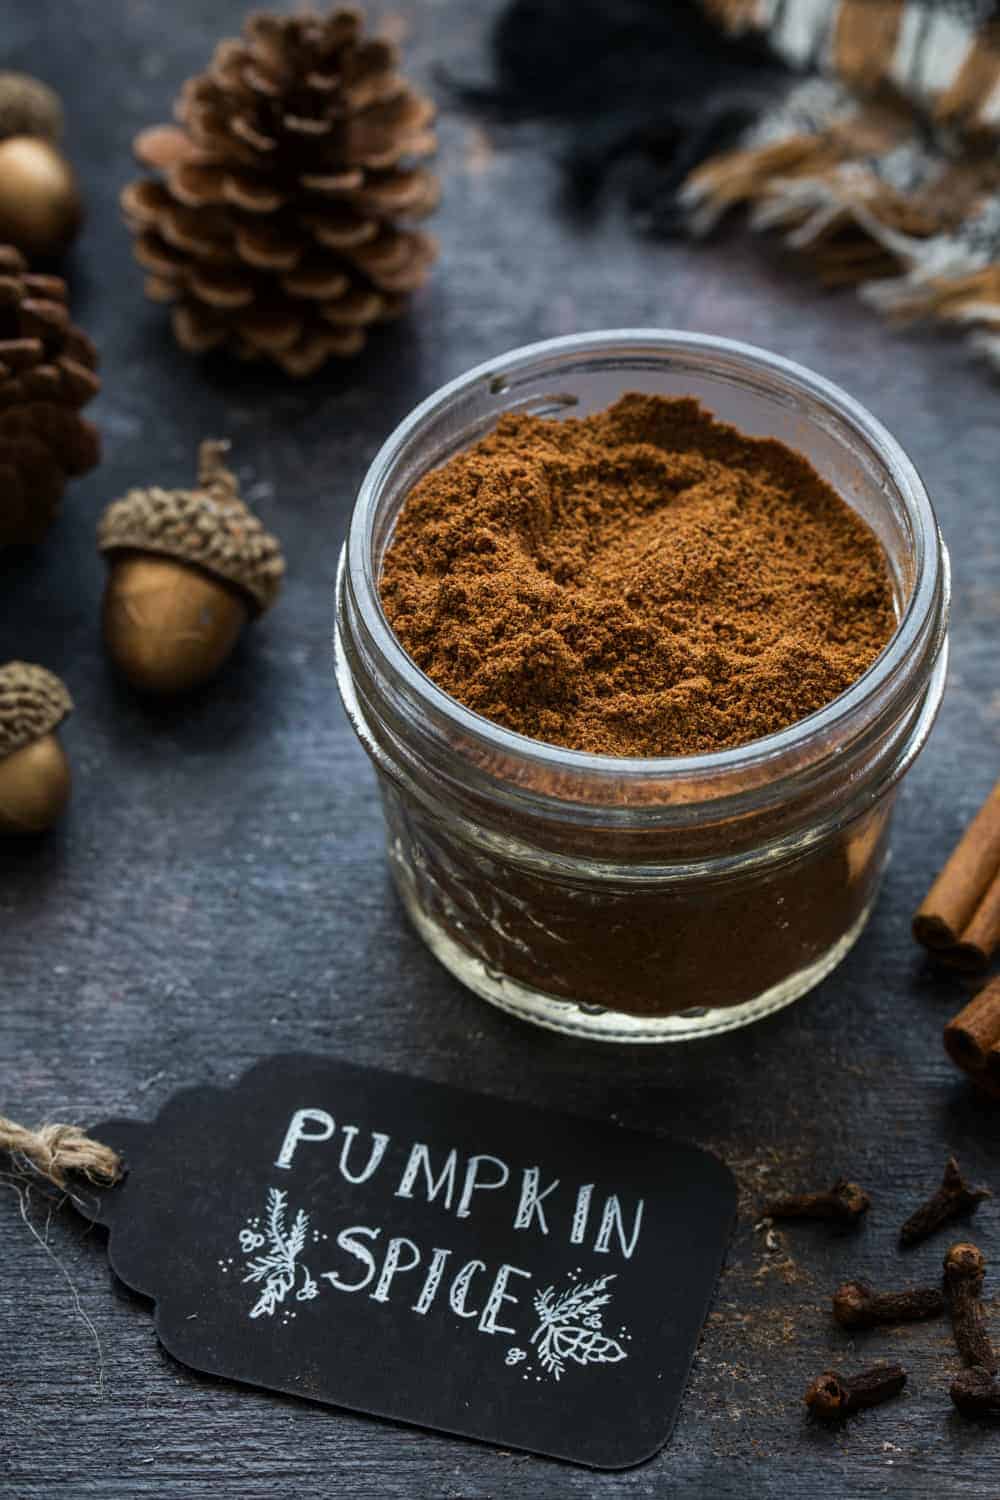 Pumpkin Pie Spice couldn't be easier to make at home. You'll love the warm and cozy flavor it adds to all of your holiday baking recipes.